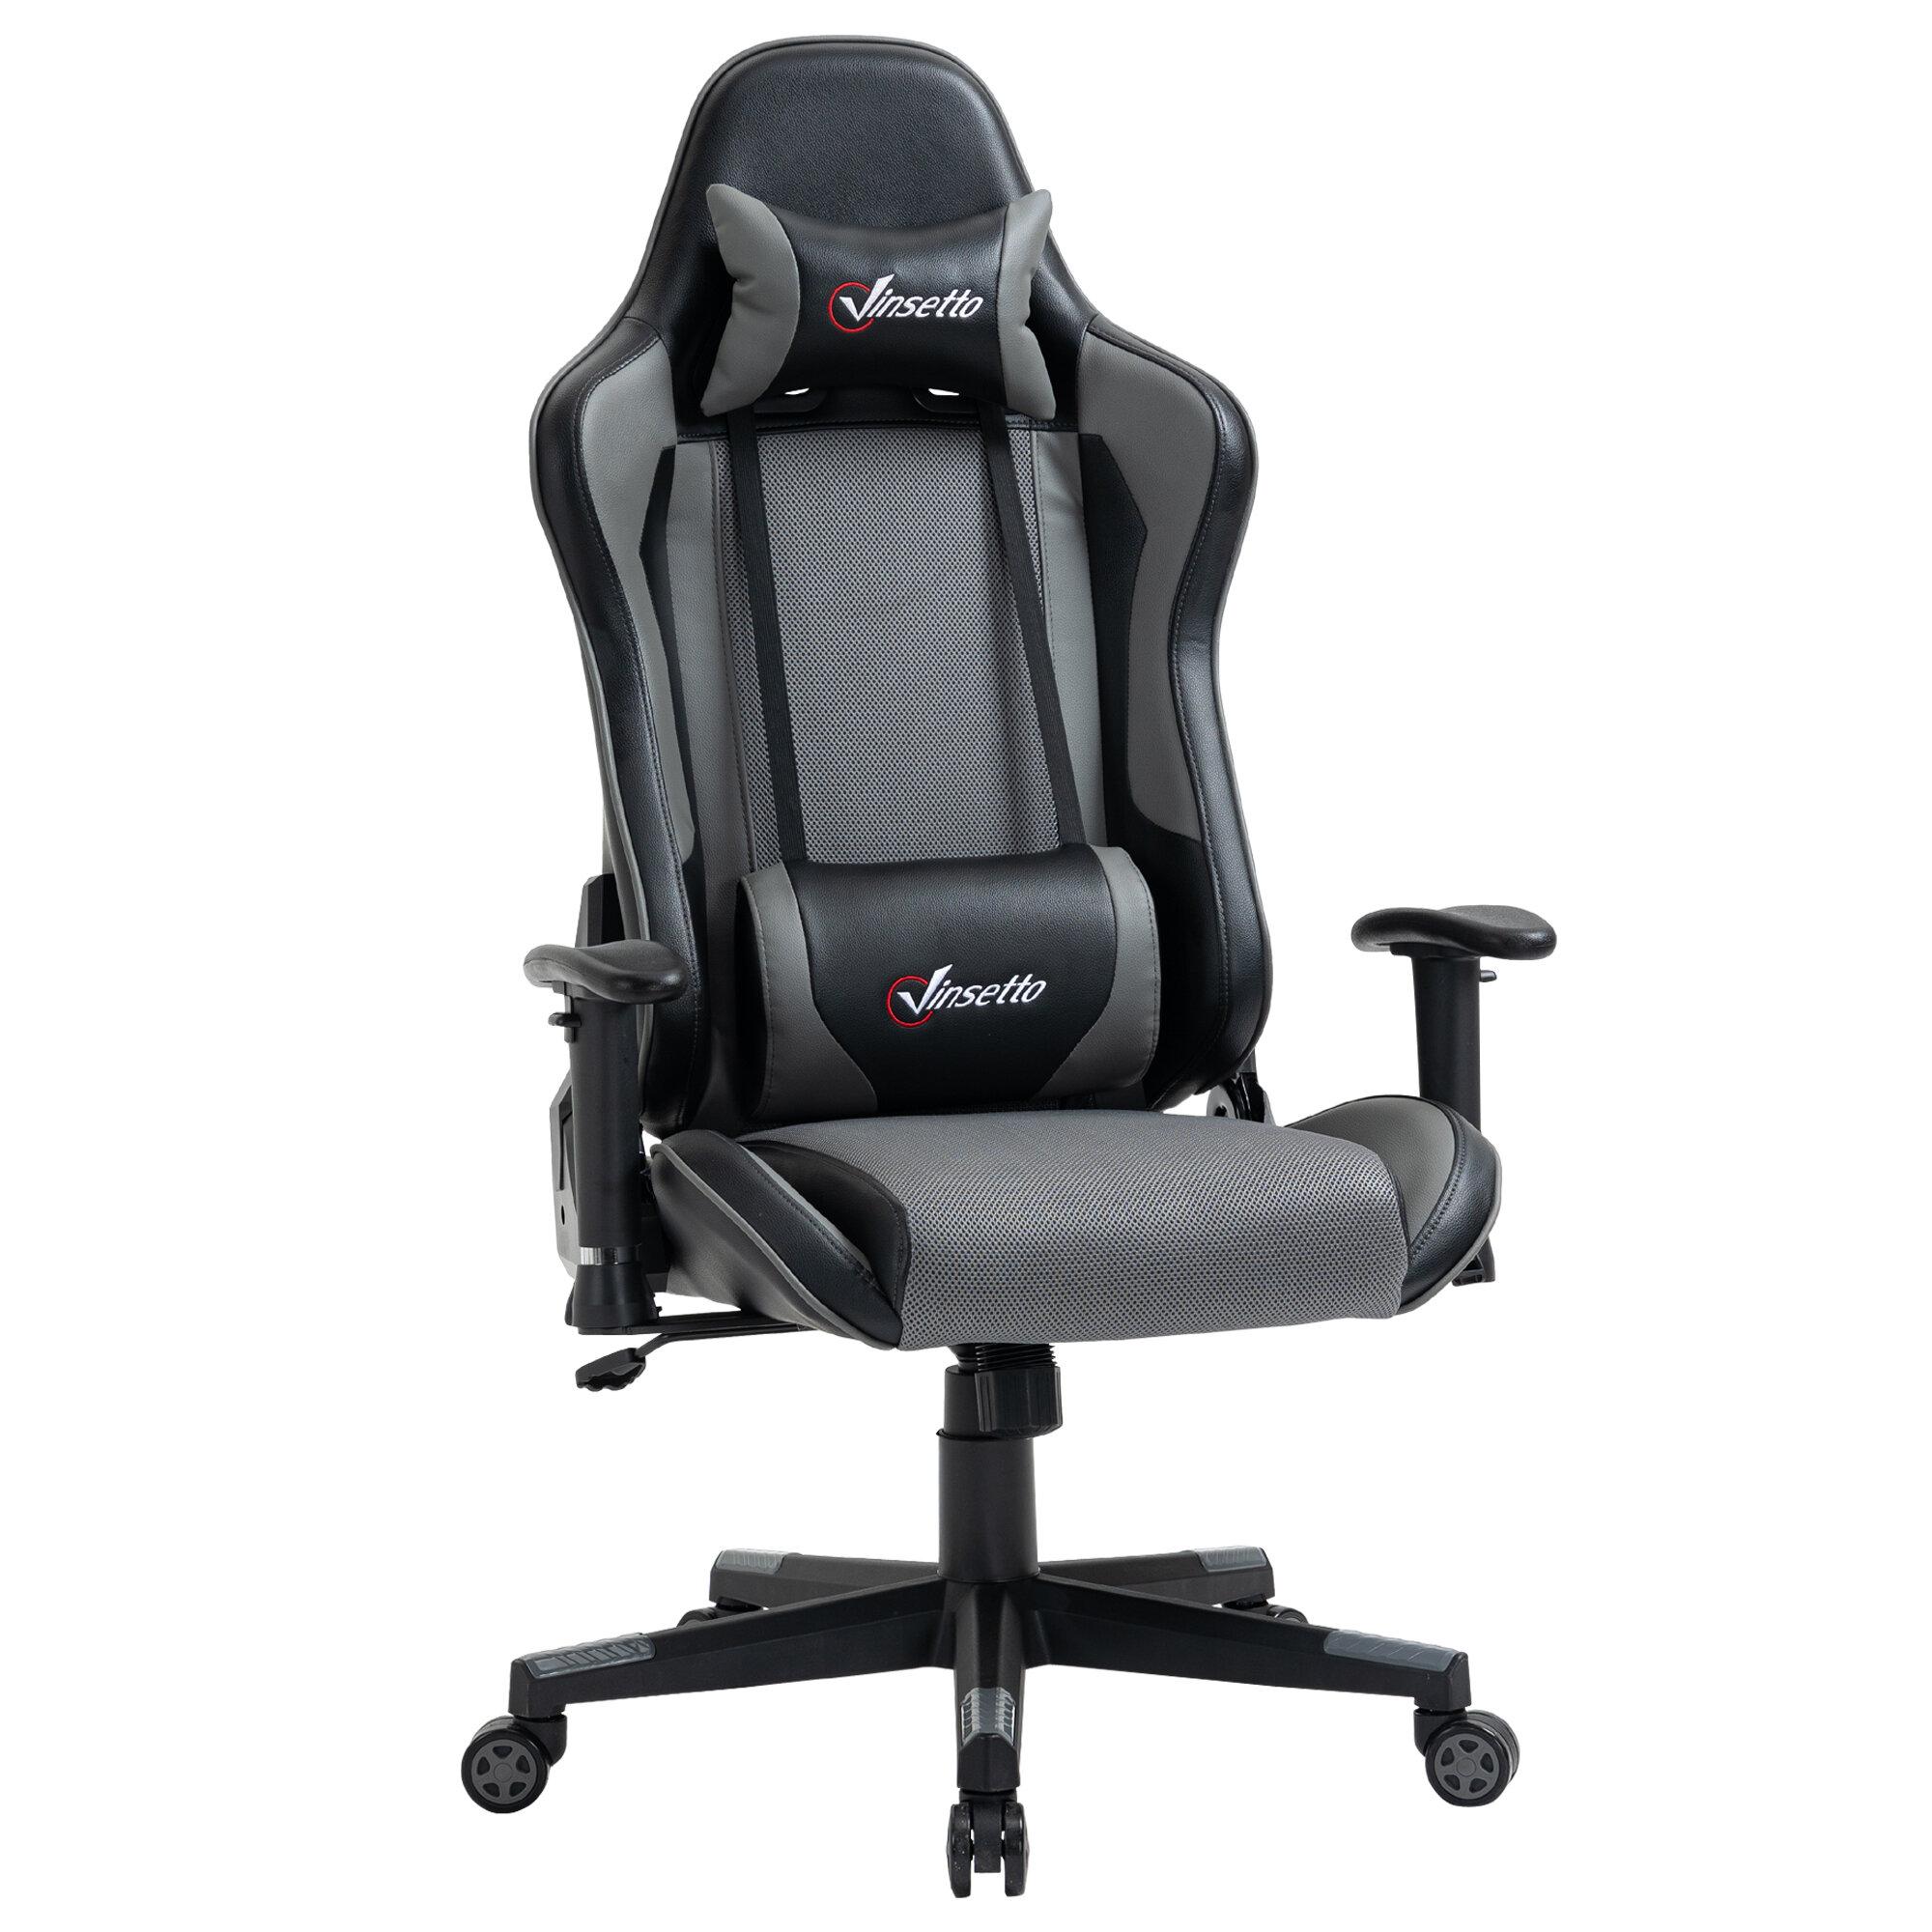 Racing Gaming Chair Office Recliner Lift Computer Desk Chairs Swivel Adjustable 